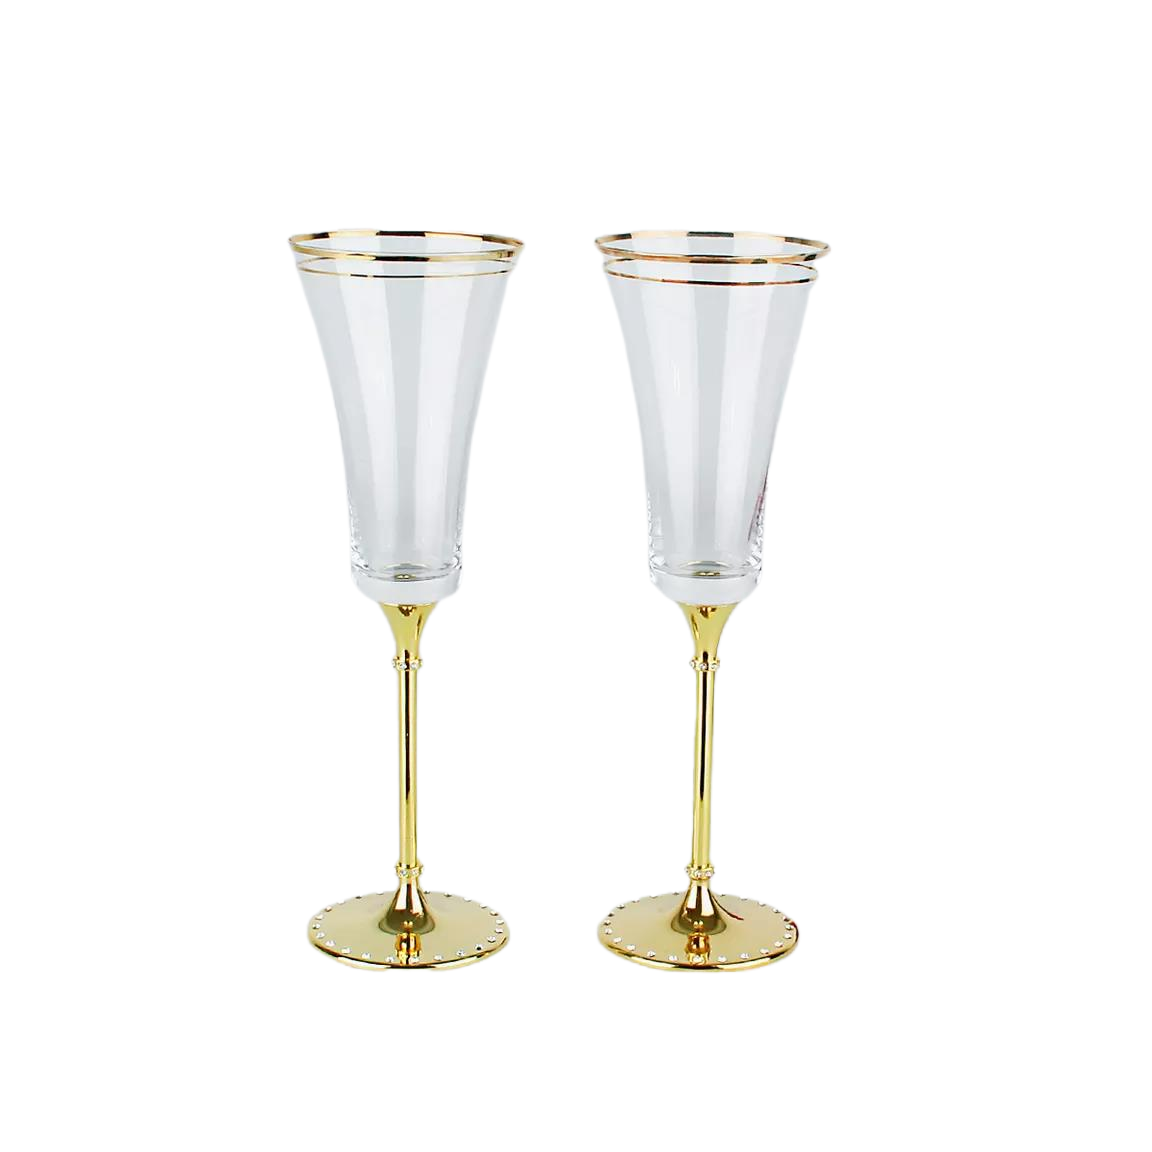 CHAMPAGNE GLASSES MADE IN CHINA 9OZ - SET OF 2